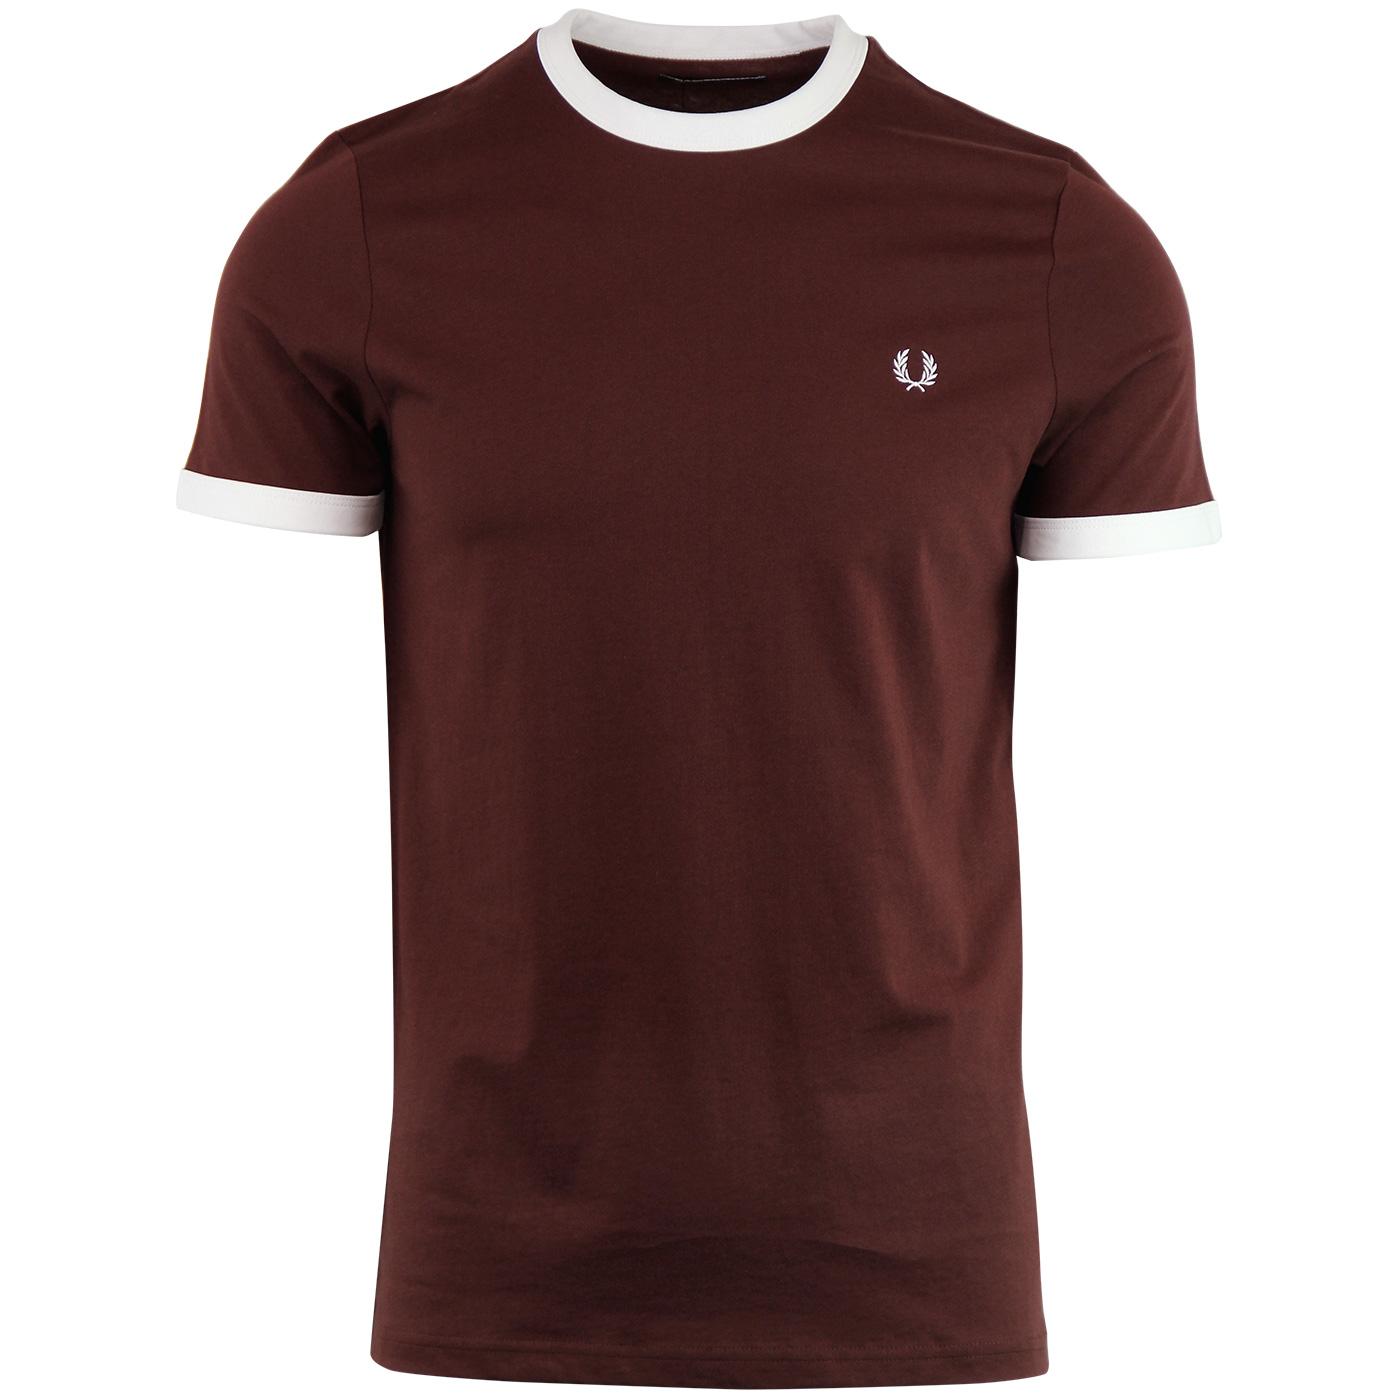 FRED PERRY Retro 1960's Ringer Tee - Stadium Red